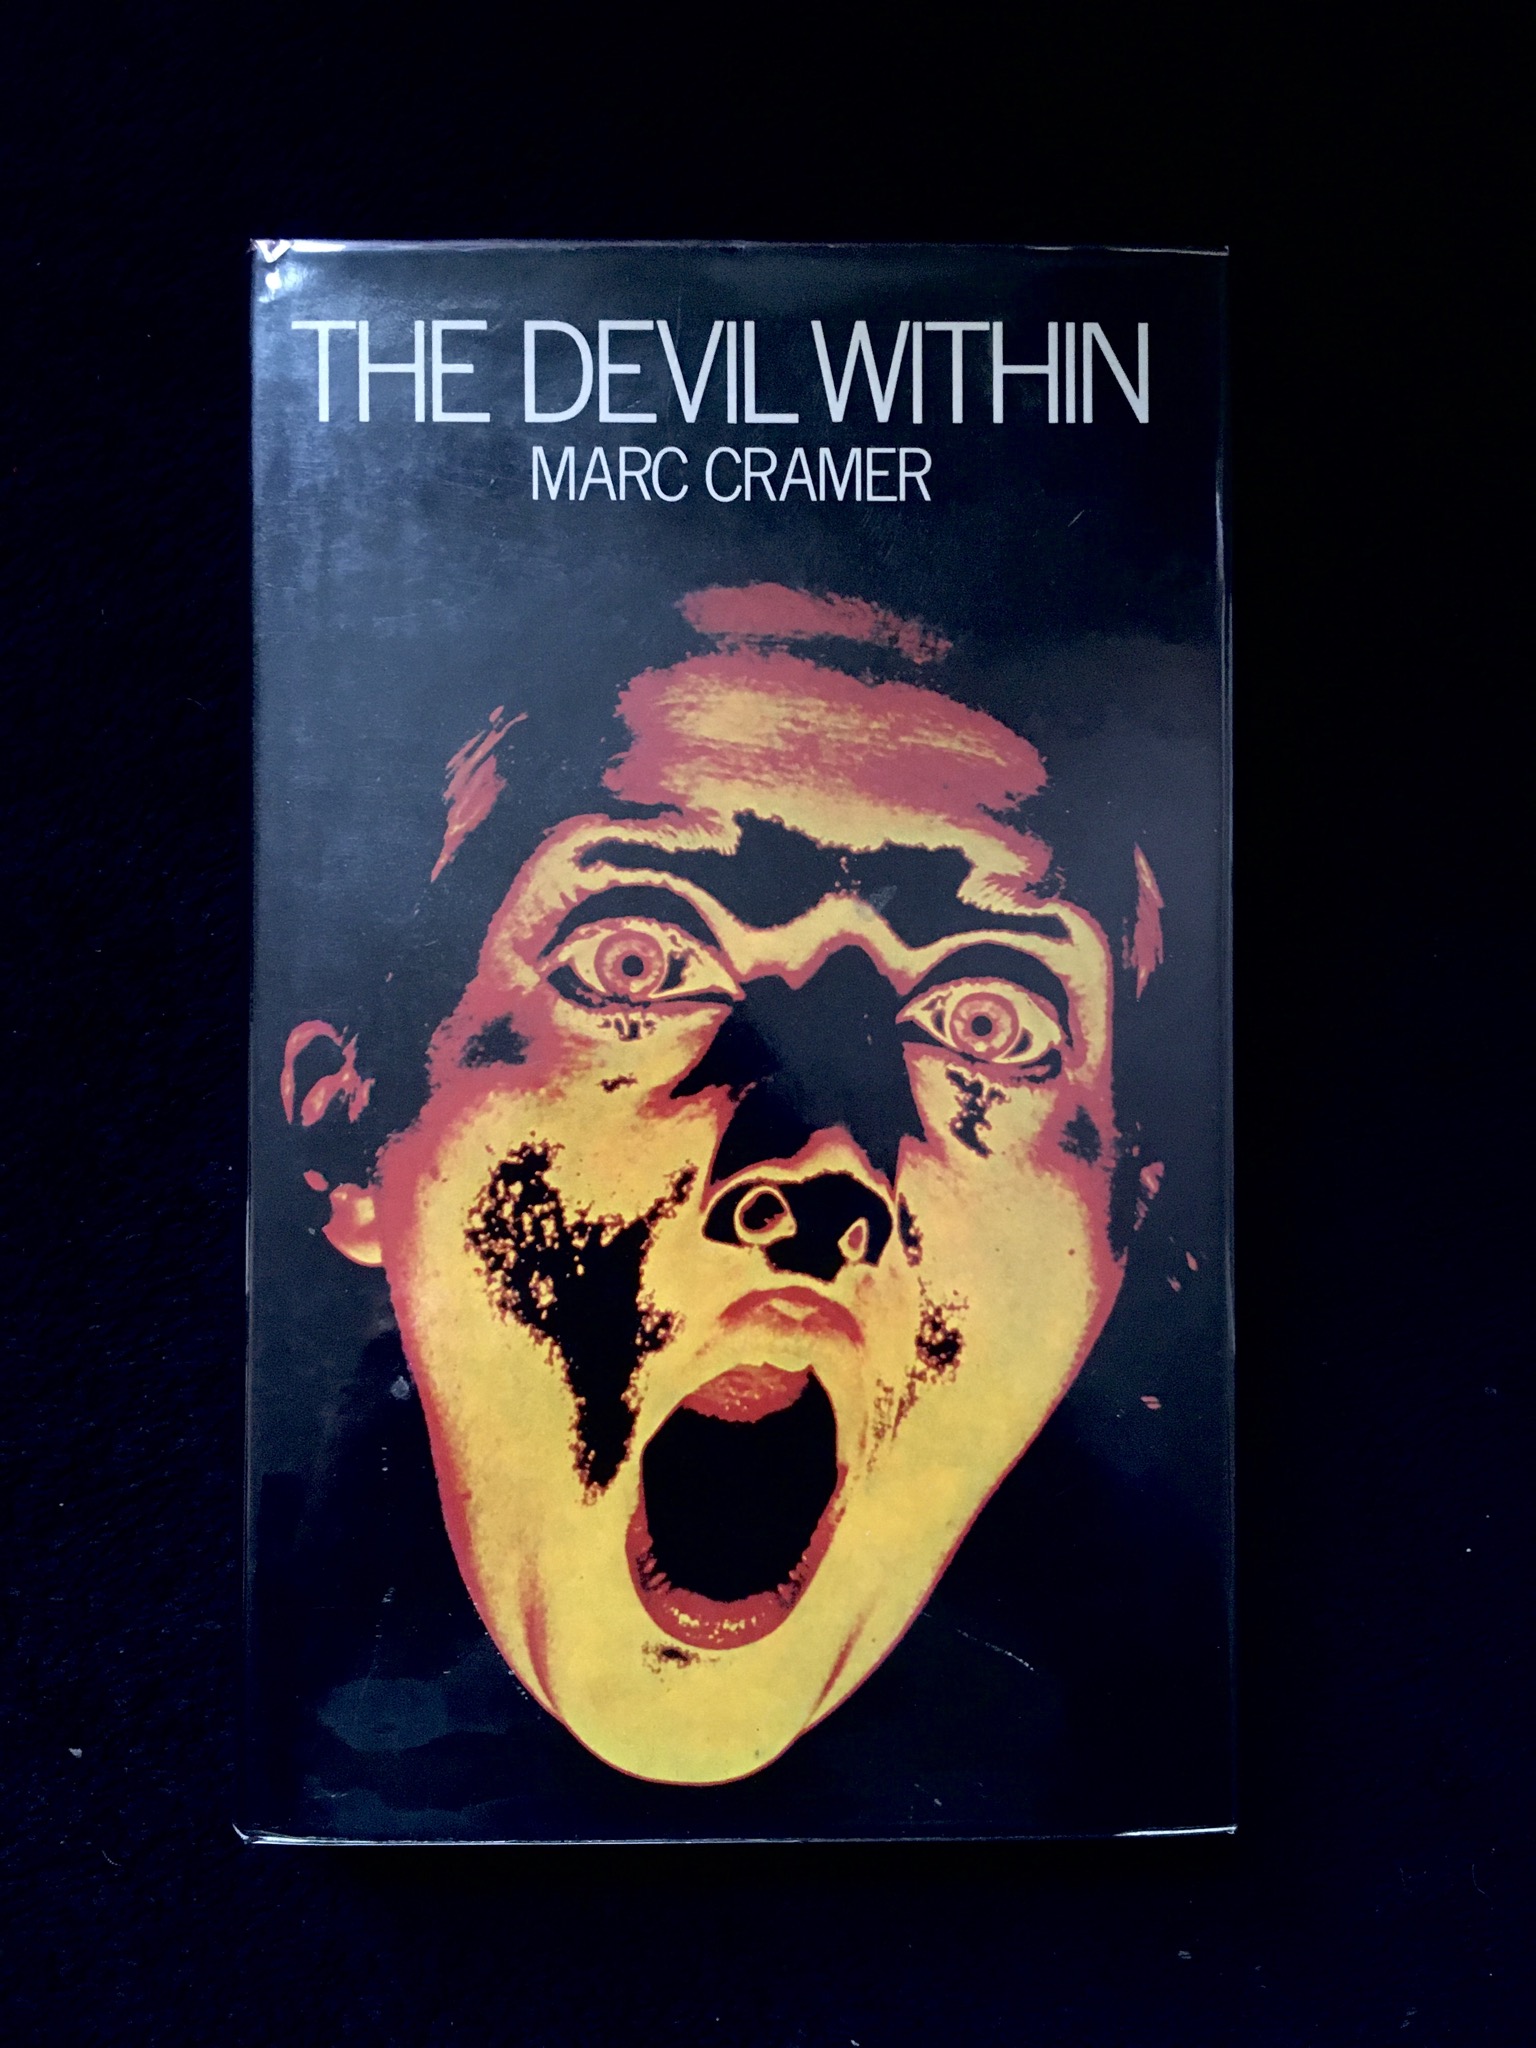 The Devil Within by Marc Cramer